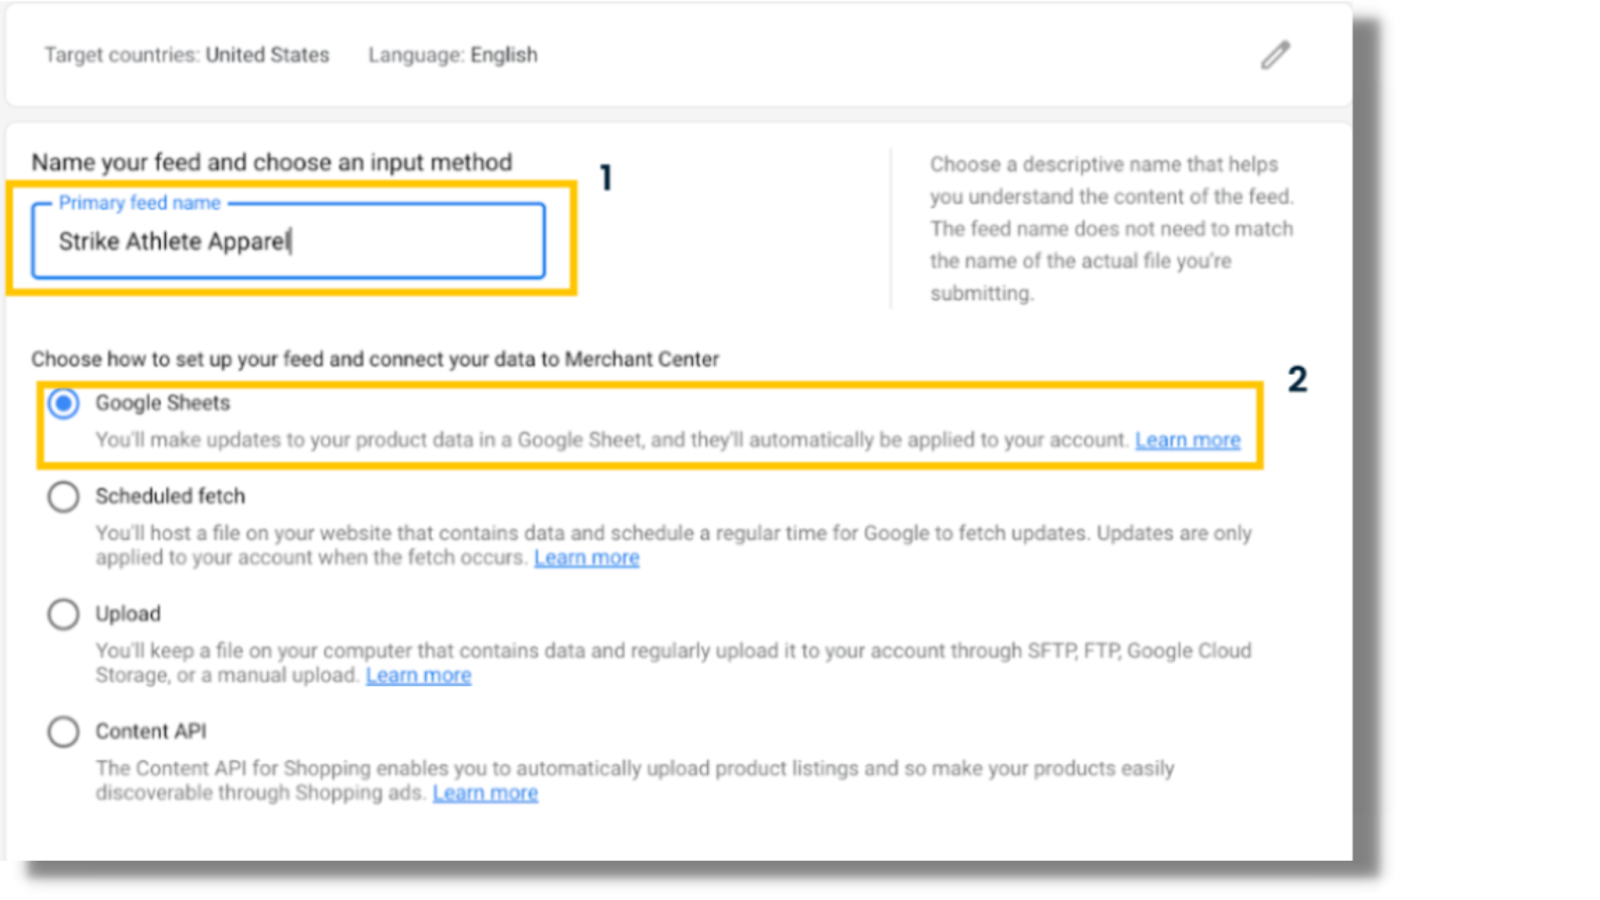 Setting Up Google Merchant Center and Product Feed - Feed and choose input method